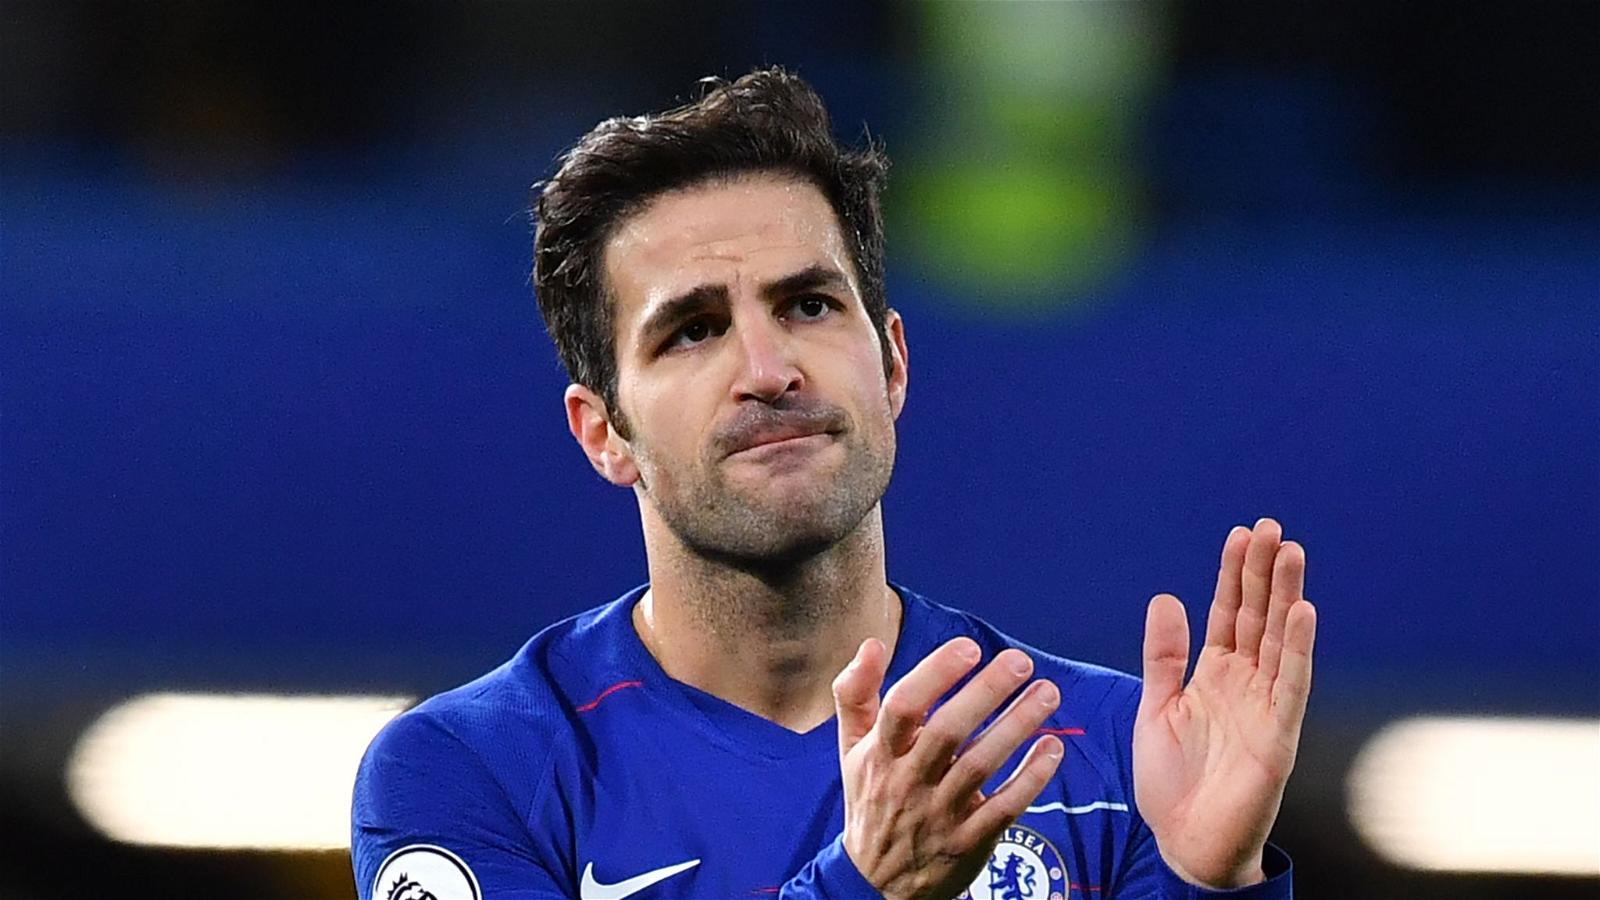  Cesc Fabregas, a Spanish midfielder, is pictured playing for Chelsea, a professional football club based in London, England.